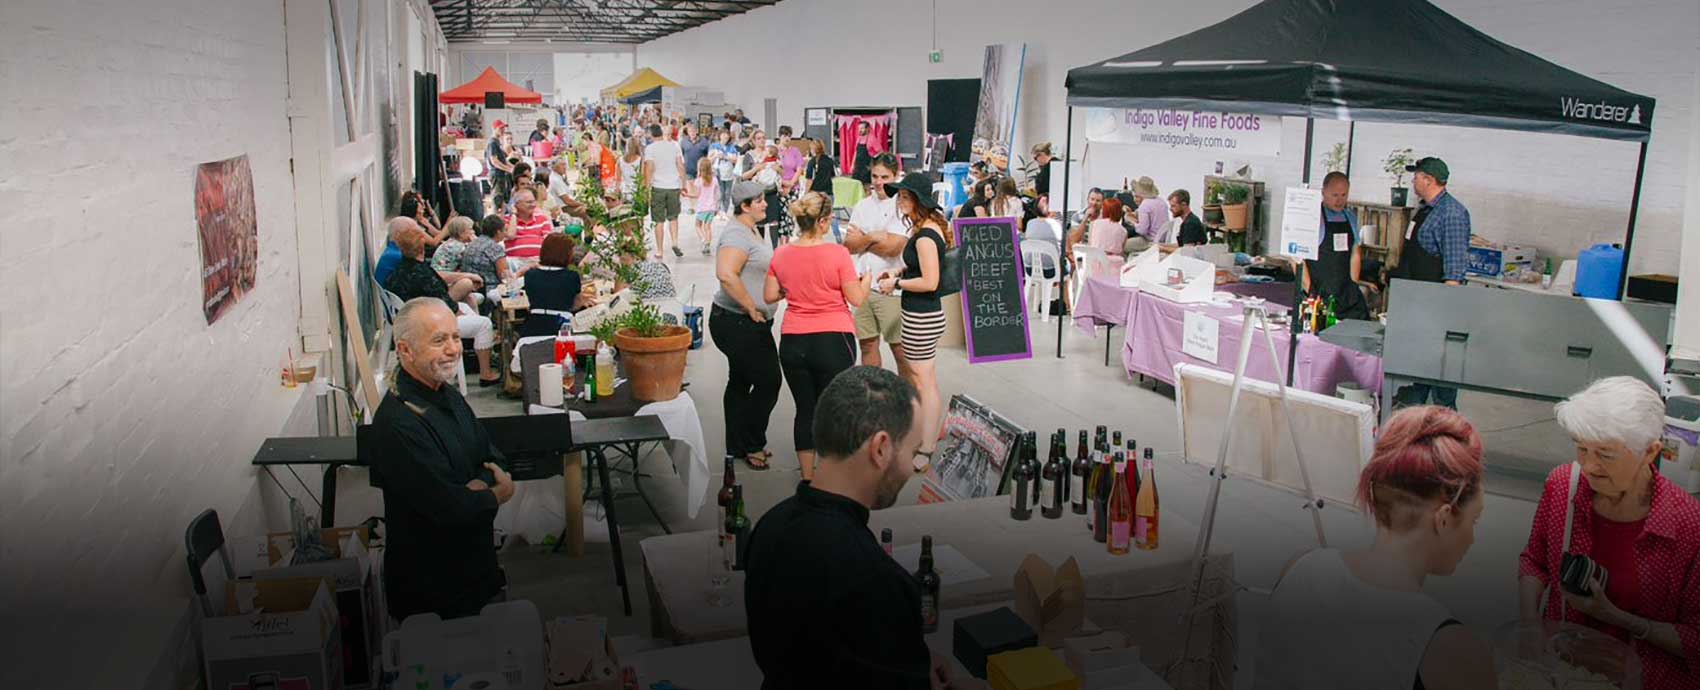 North East Food and Wine show